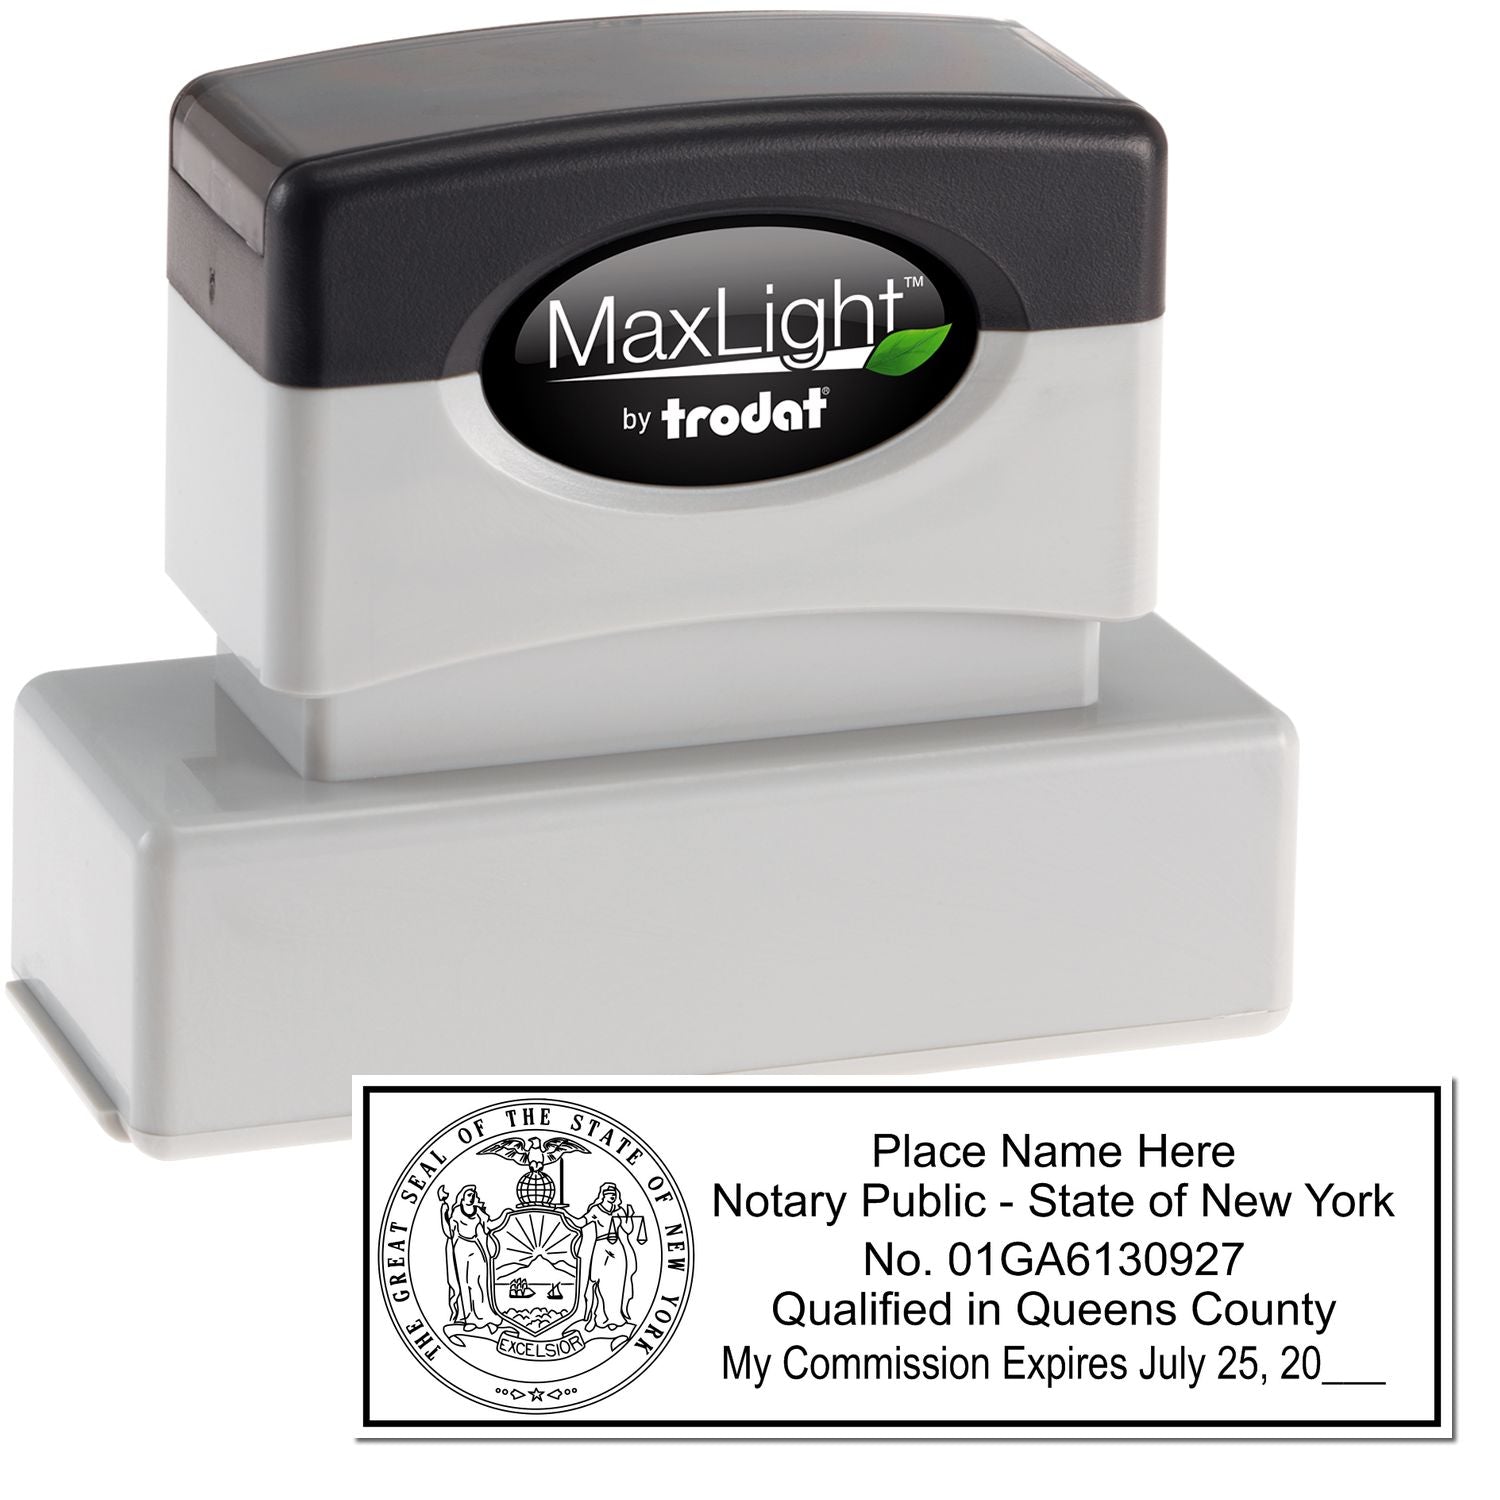 The main image for the MaxLight Premium Pre-Inked New York State Seal Notarial Stamp depicting a sample of the imprint and electronic files